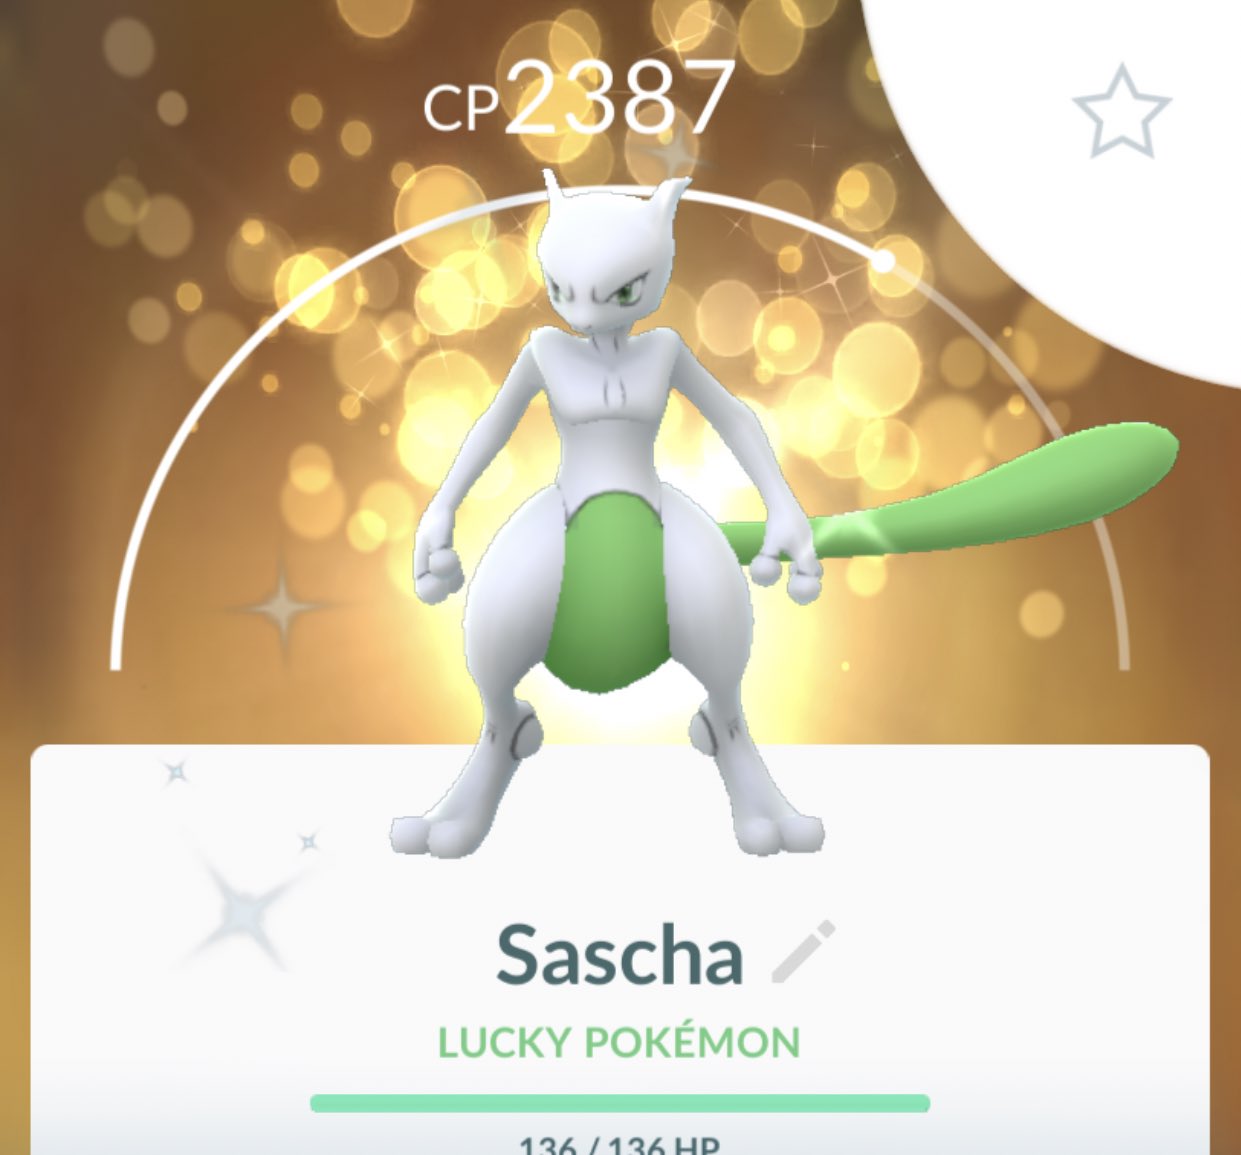 My first Shlundo Mewtwo, been waiting long for this. And I maxed